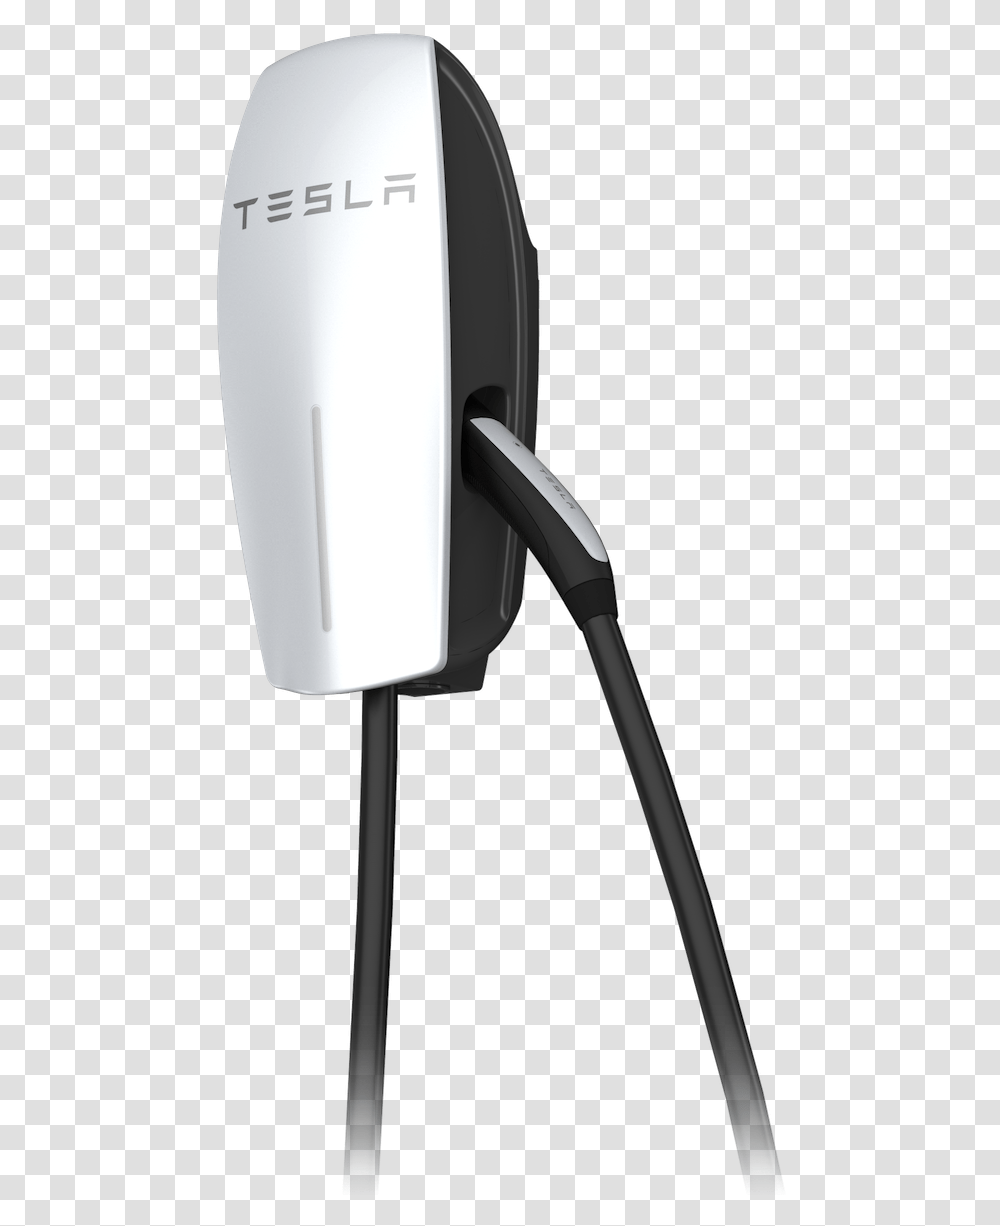 Tesla Car Charger Power Production Management Tesla Level 2 Charger, Chair, Furniture, Adapter, Appliance Transparent Png